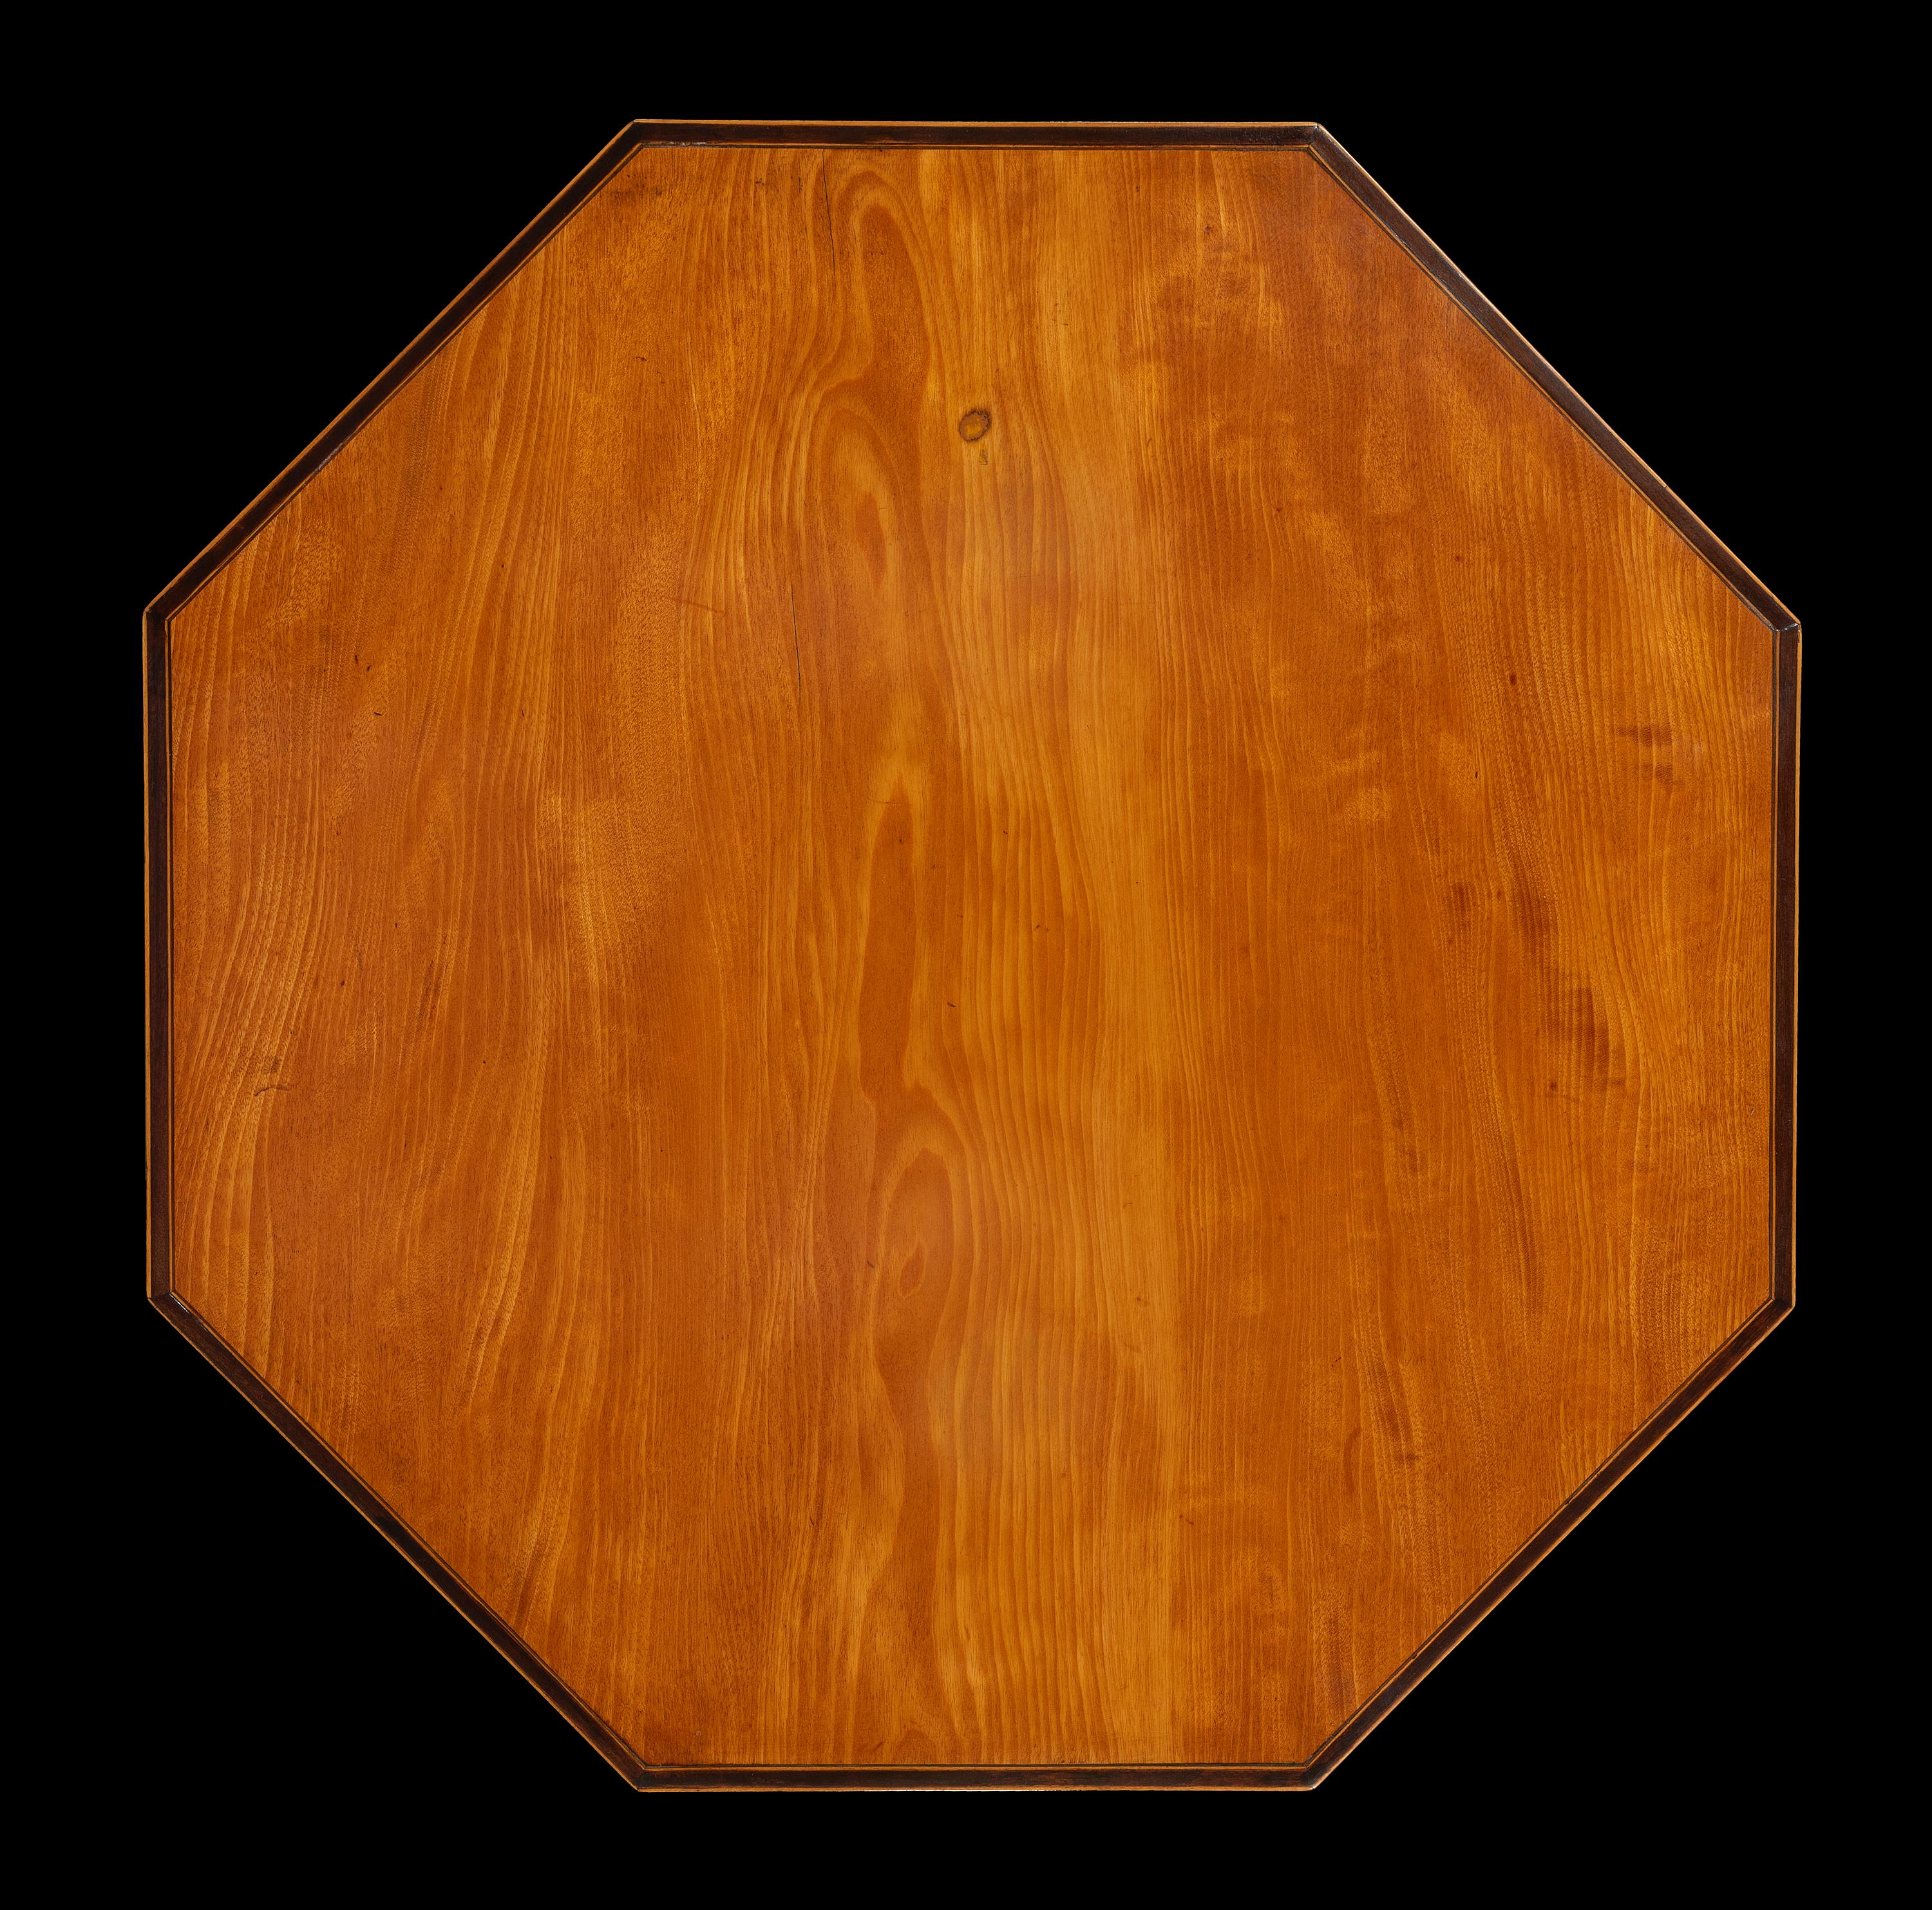 English George III Period 18th Century Satinwood Octagonal Tilt-Top Occasional Table For Sale